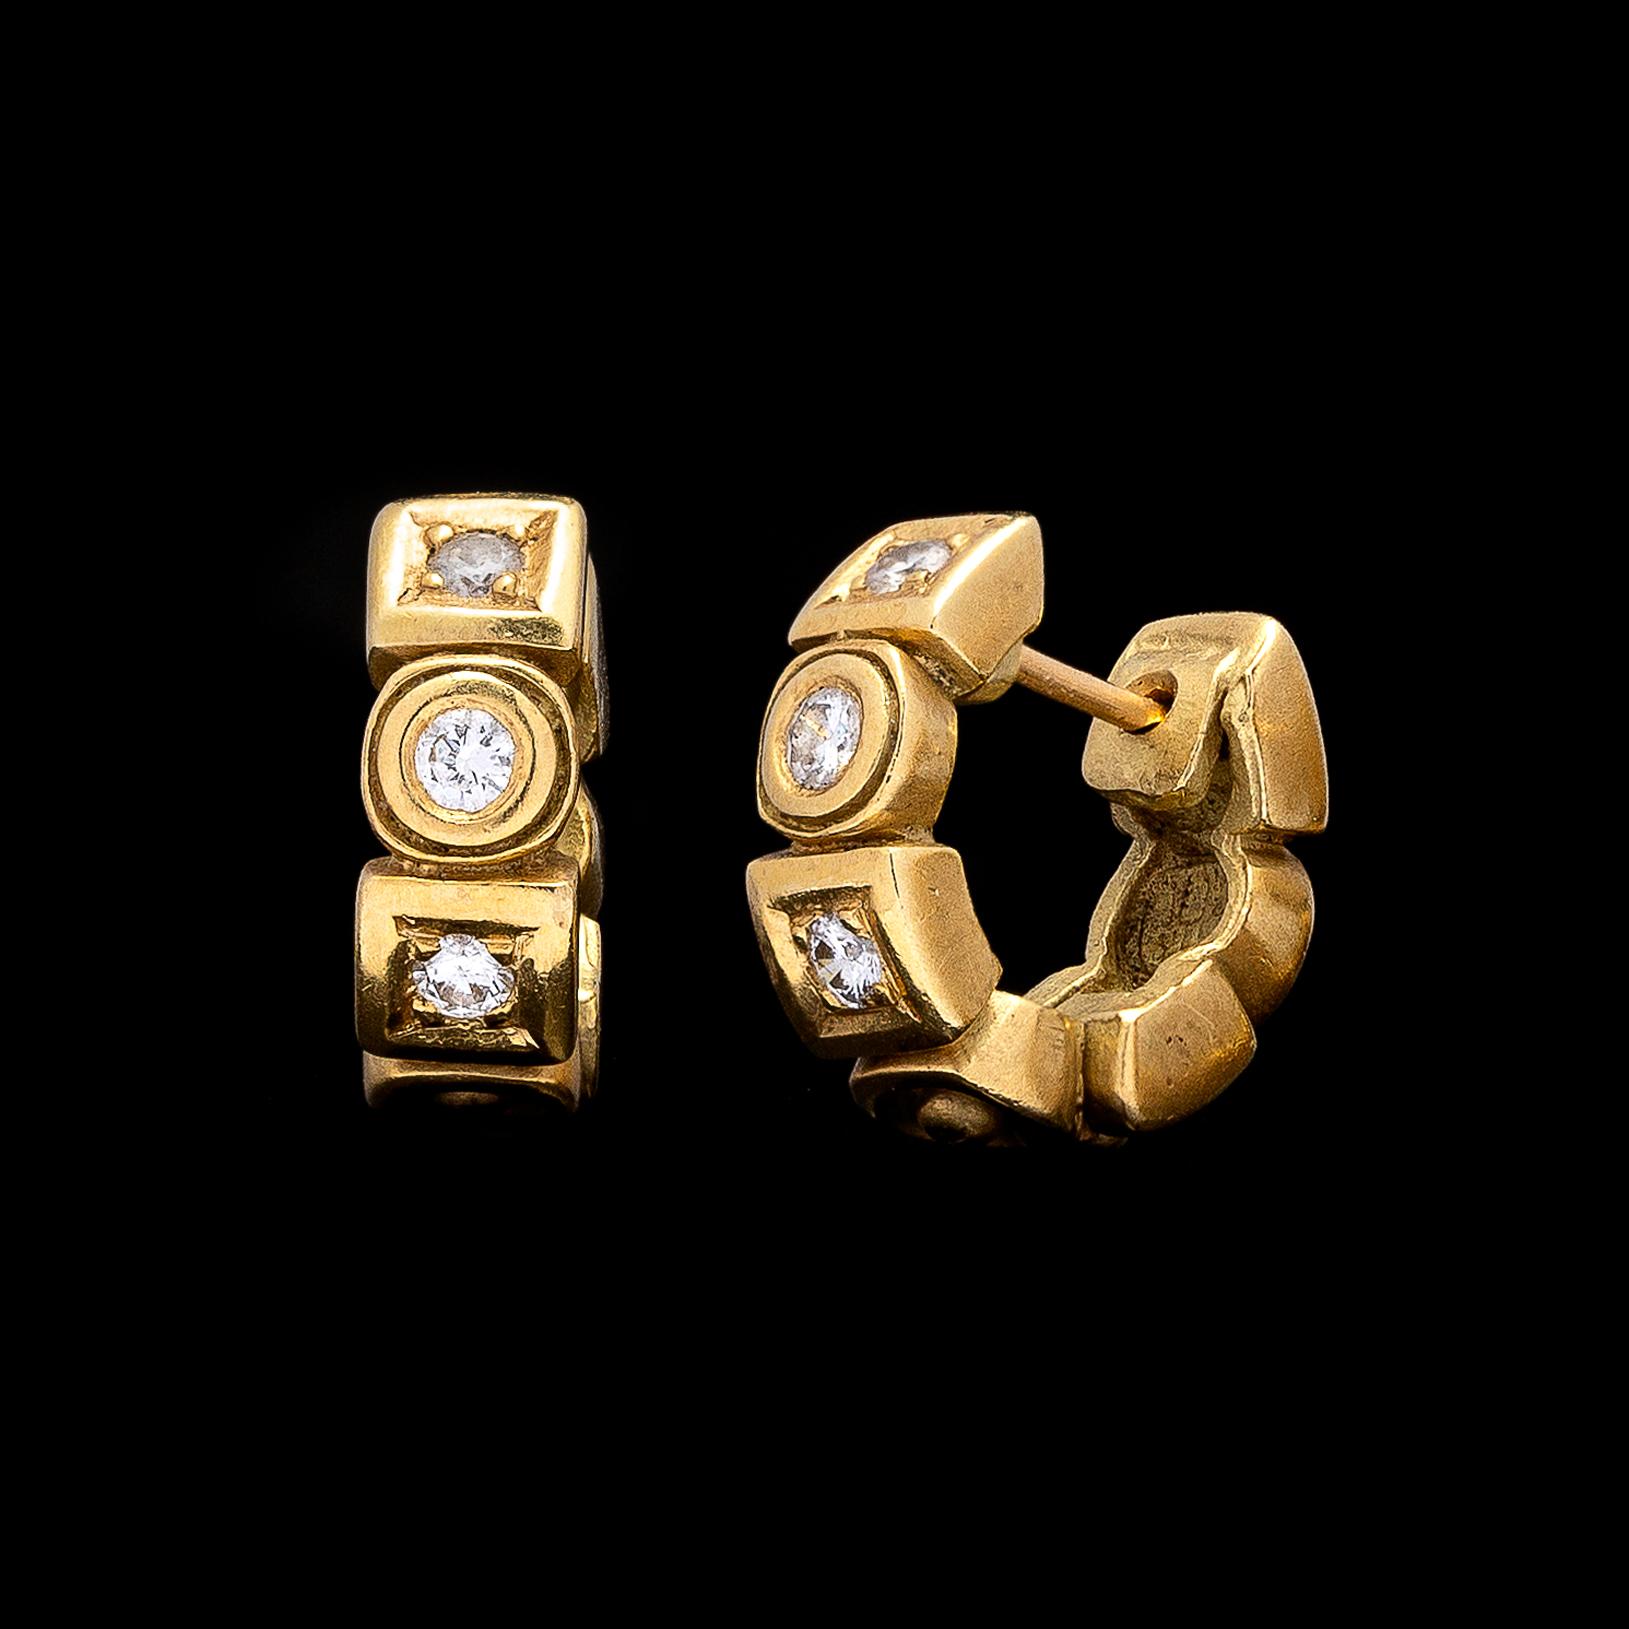 Great for everyday wear! The 18k gold earrings designed with alternating square and round sections, set with 6 round brilliant-cut diamonds, for a total weight of 0.24ct. , G-H color and VS clarity. The earrings weigh 7.6 grams and measure